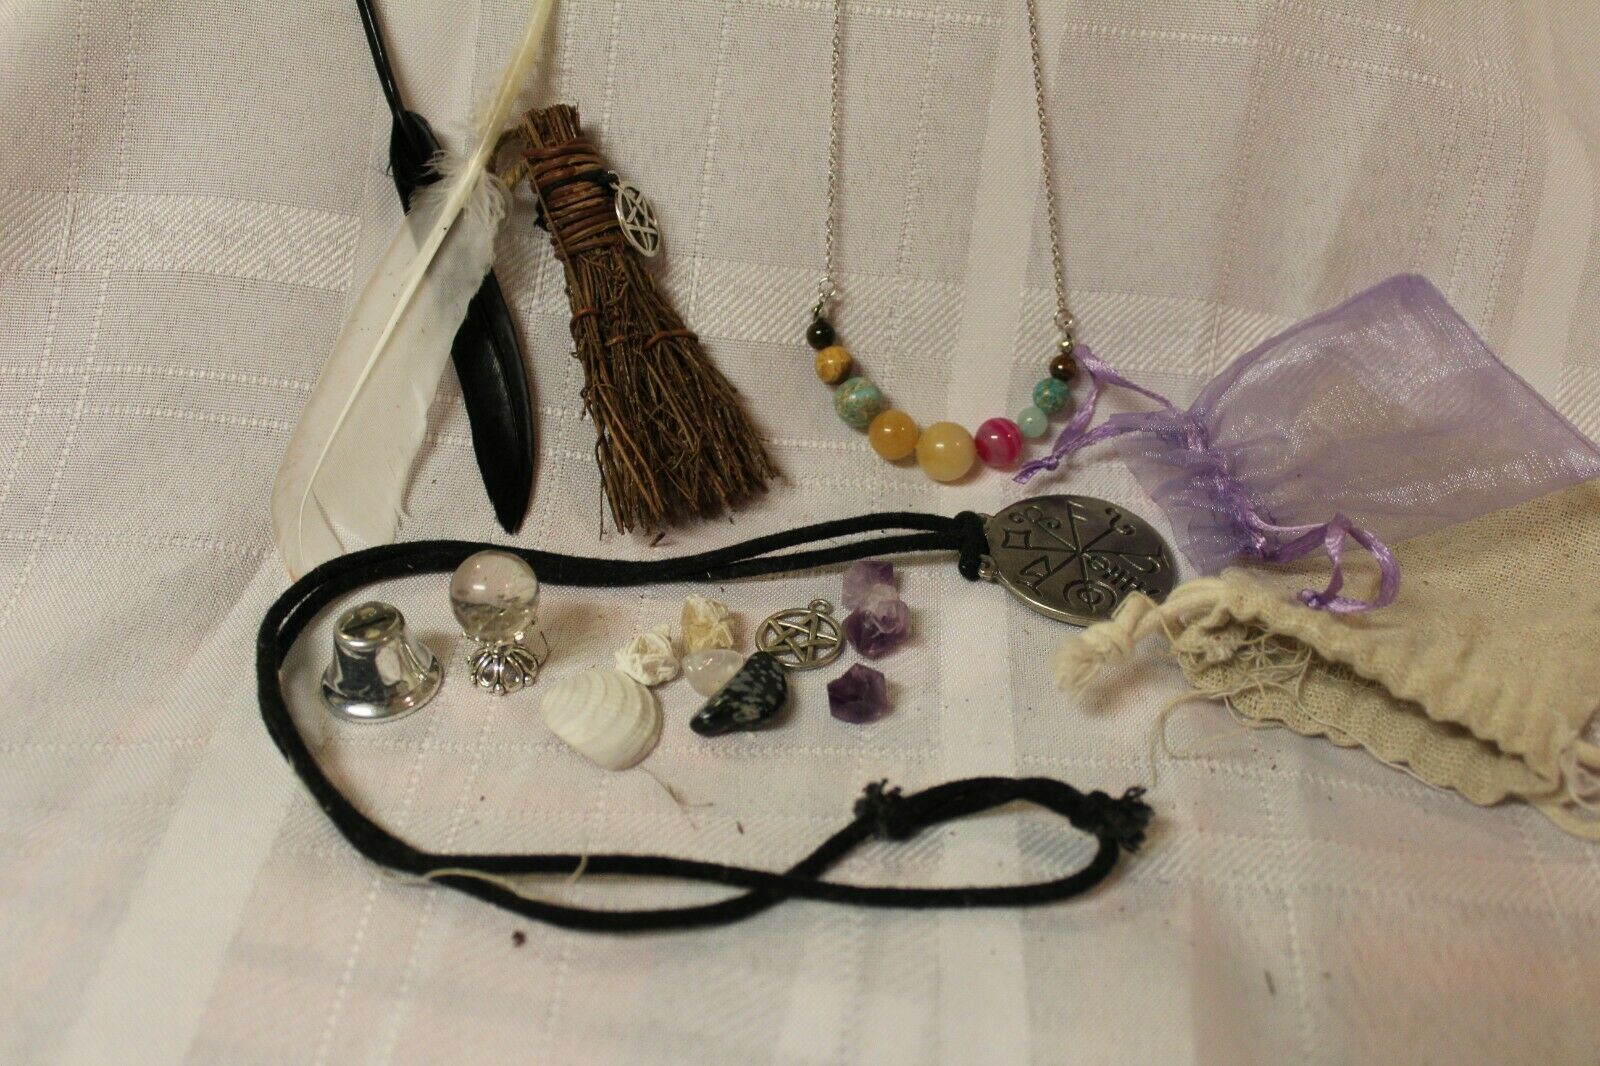 Pagan Wicca Witchcraft Kit Altar Supplies Set Spell Ritual Tools In Zippy Bag